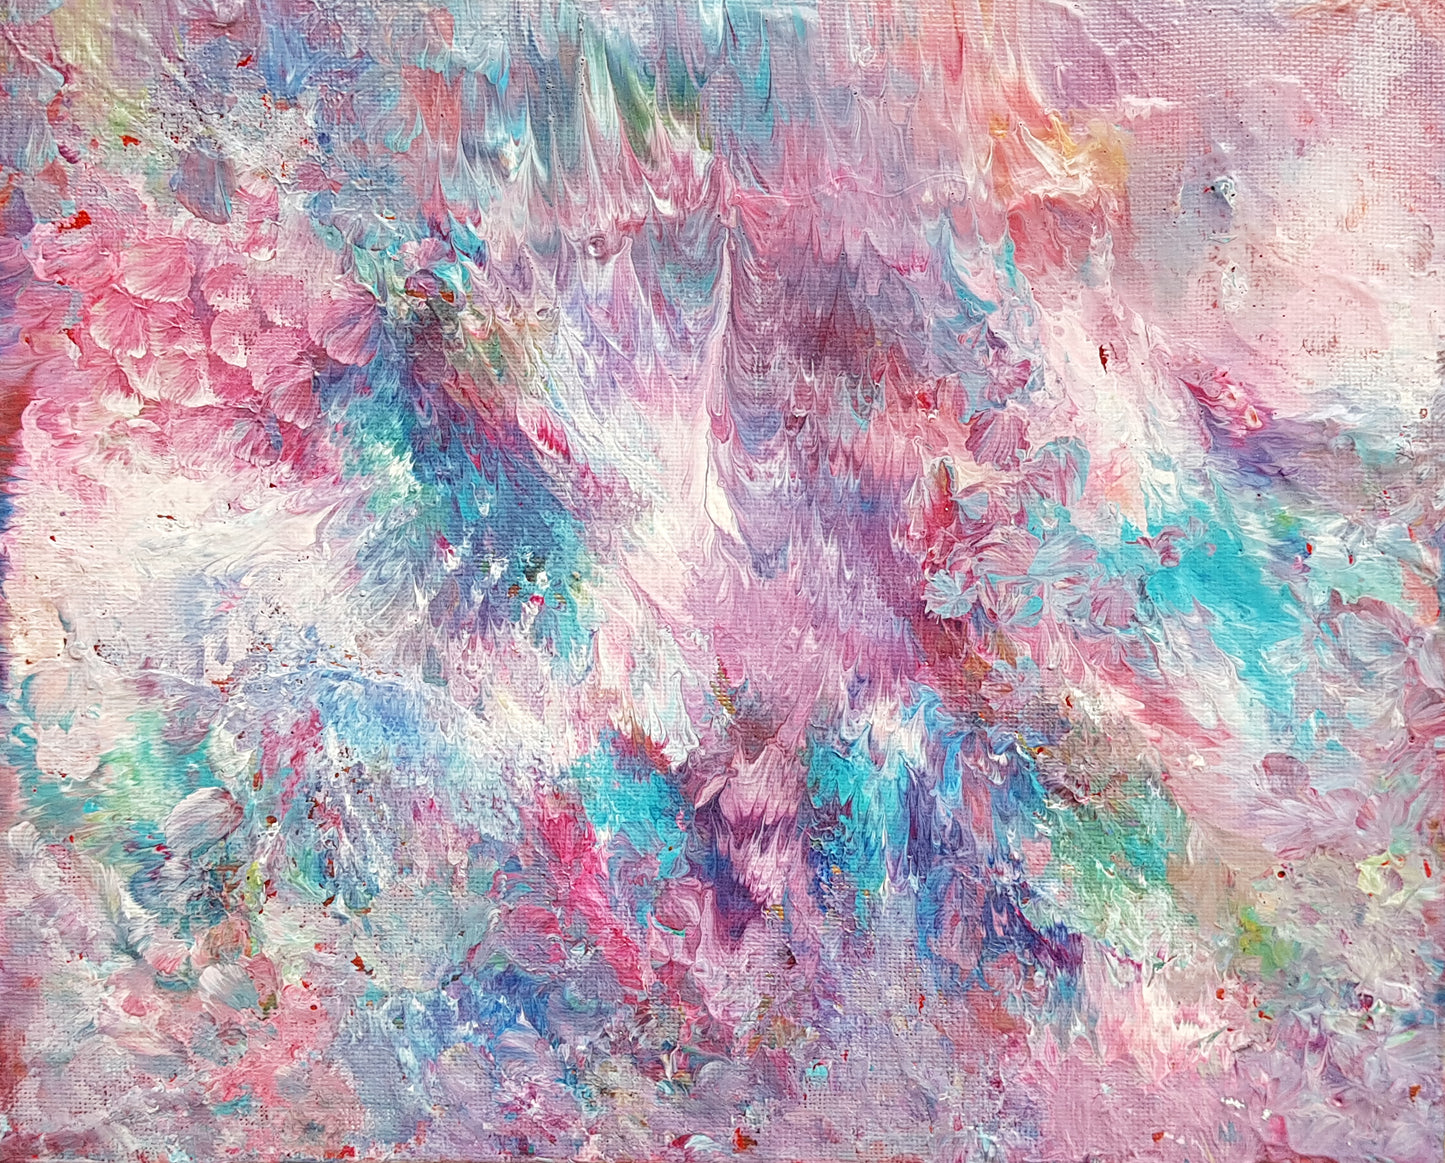 beautiful-spontaneous-abstract-expressionism-acrylic-painting-pink-purple-blue-white-cloudy-sky-painting